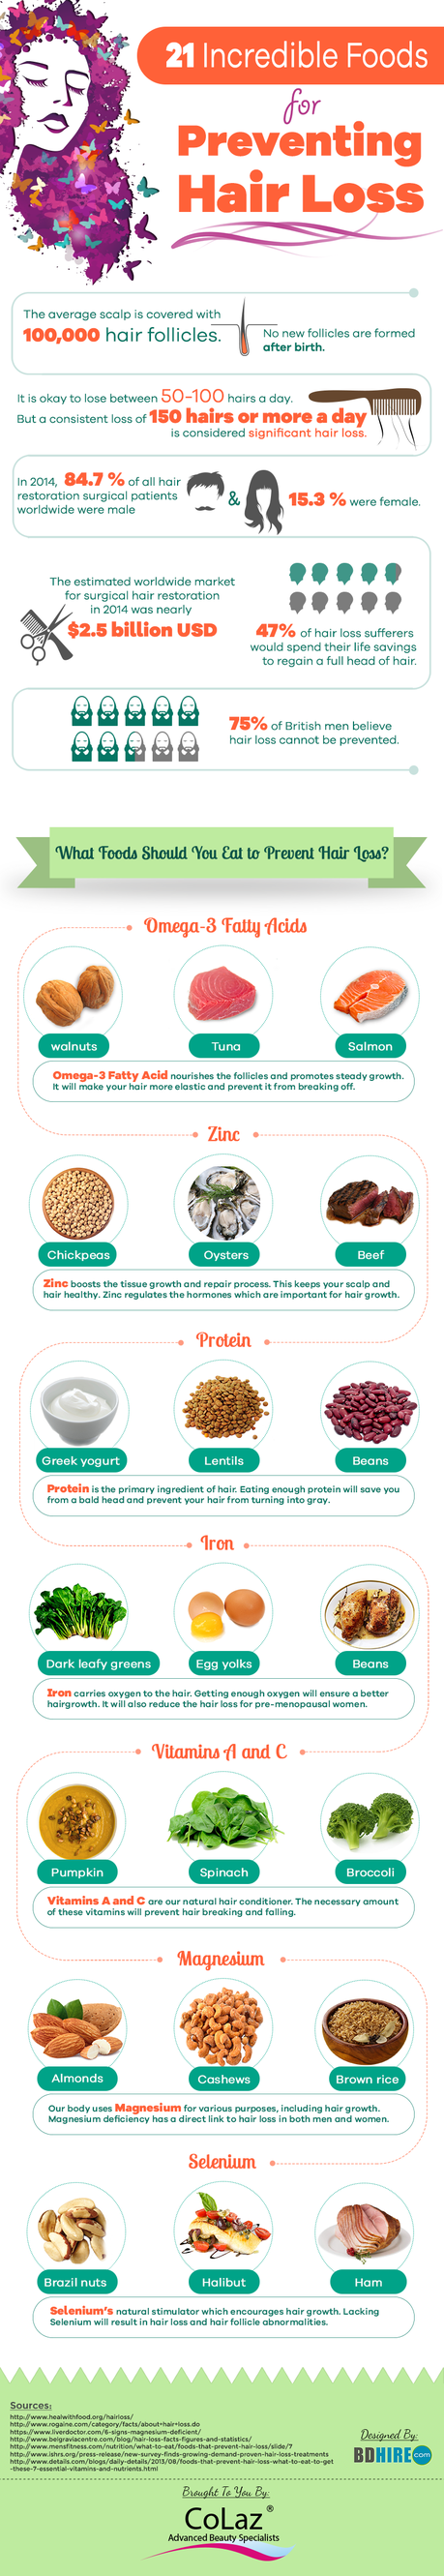 21 Incredible Foods For Preventing Hair Loss